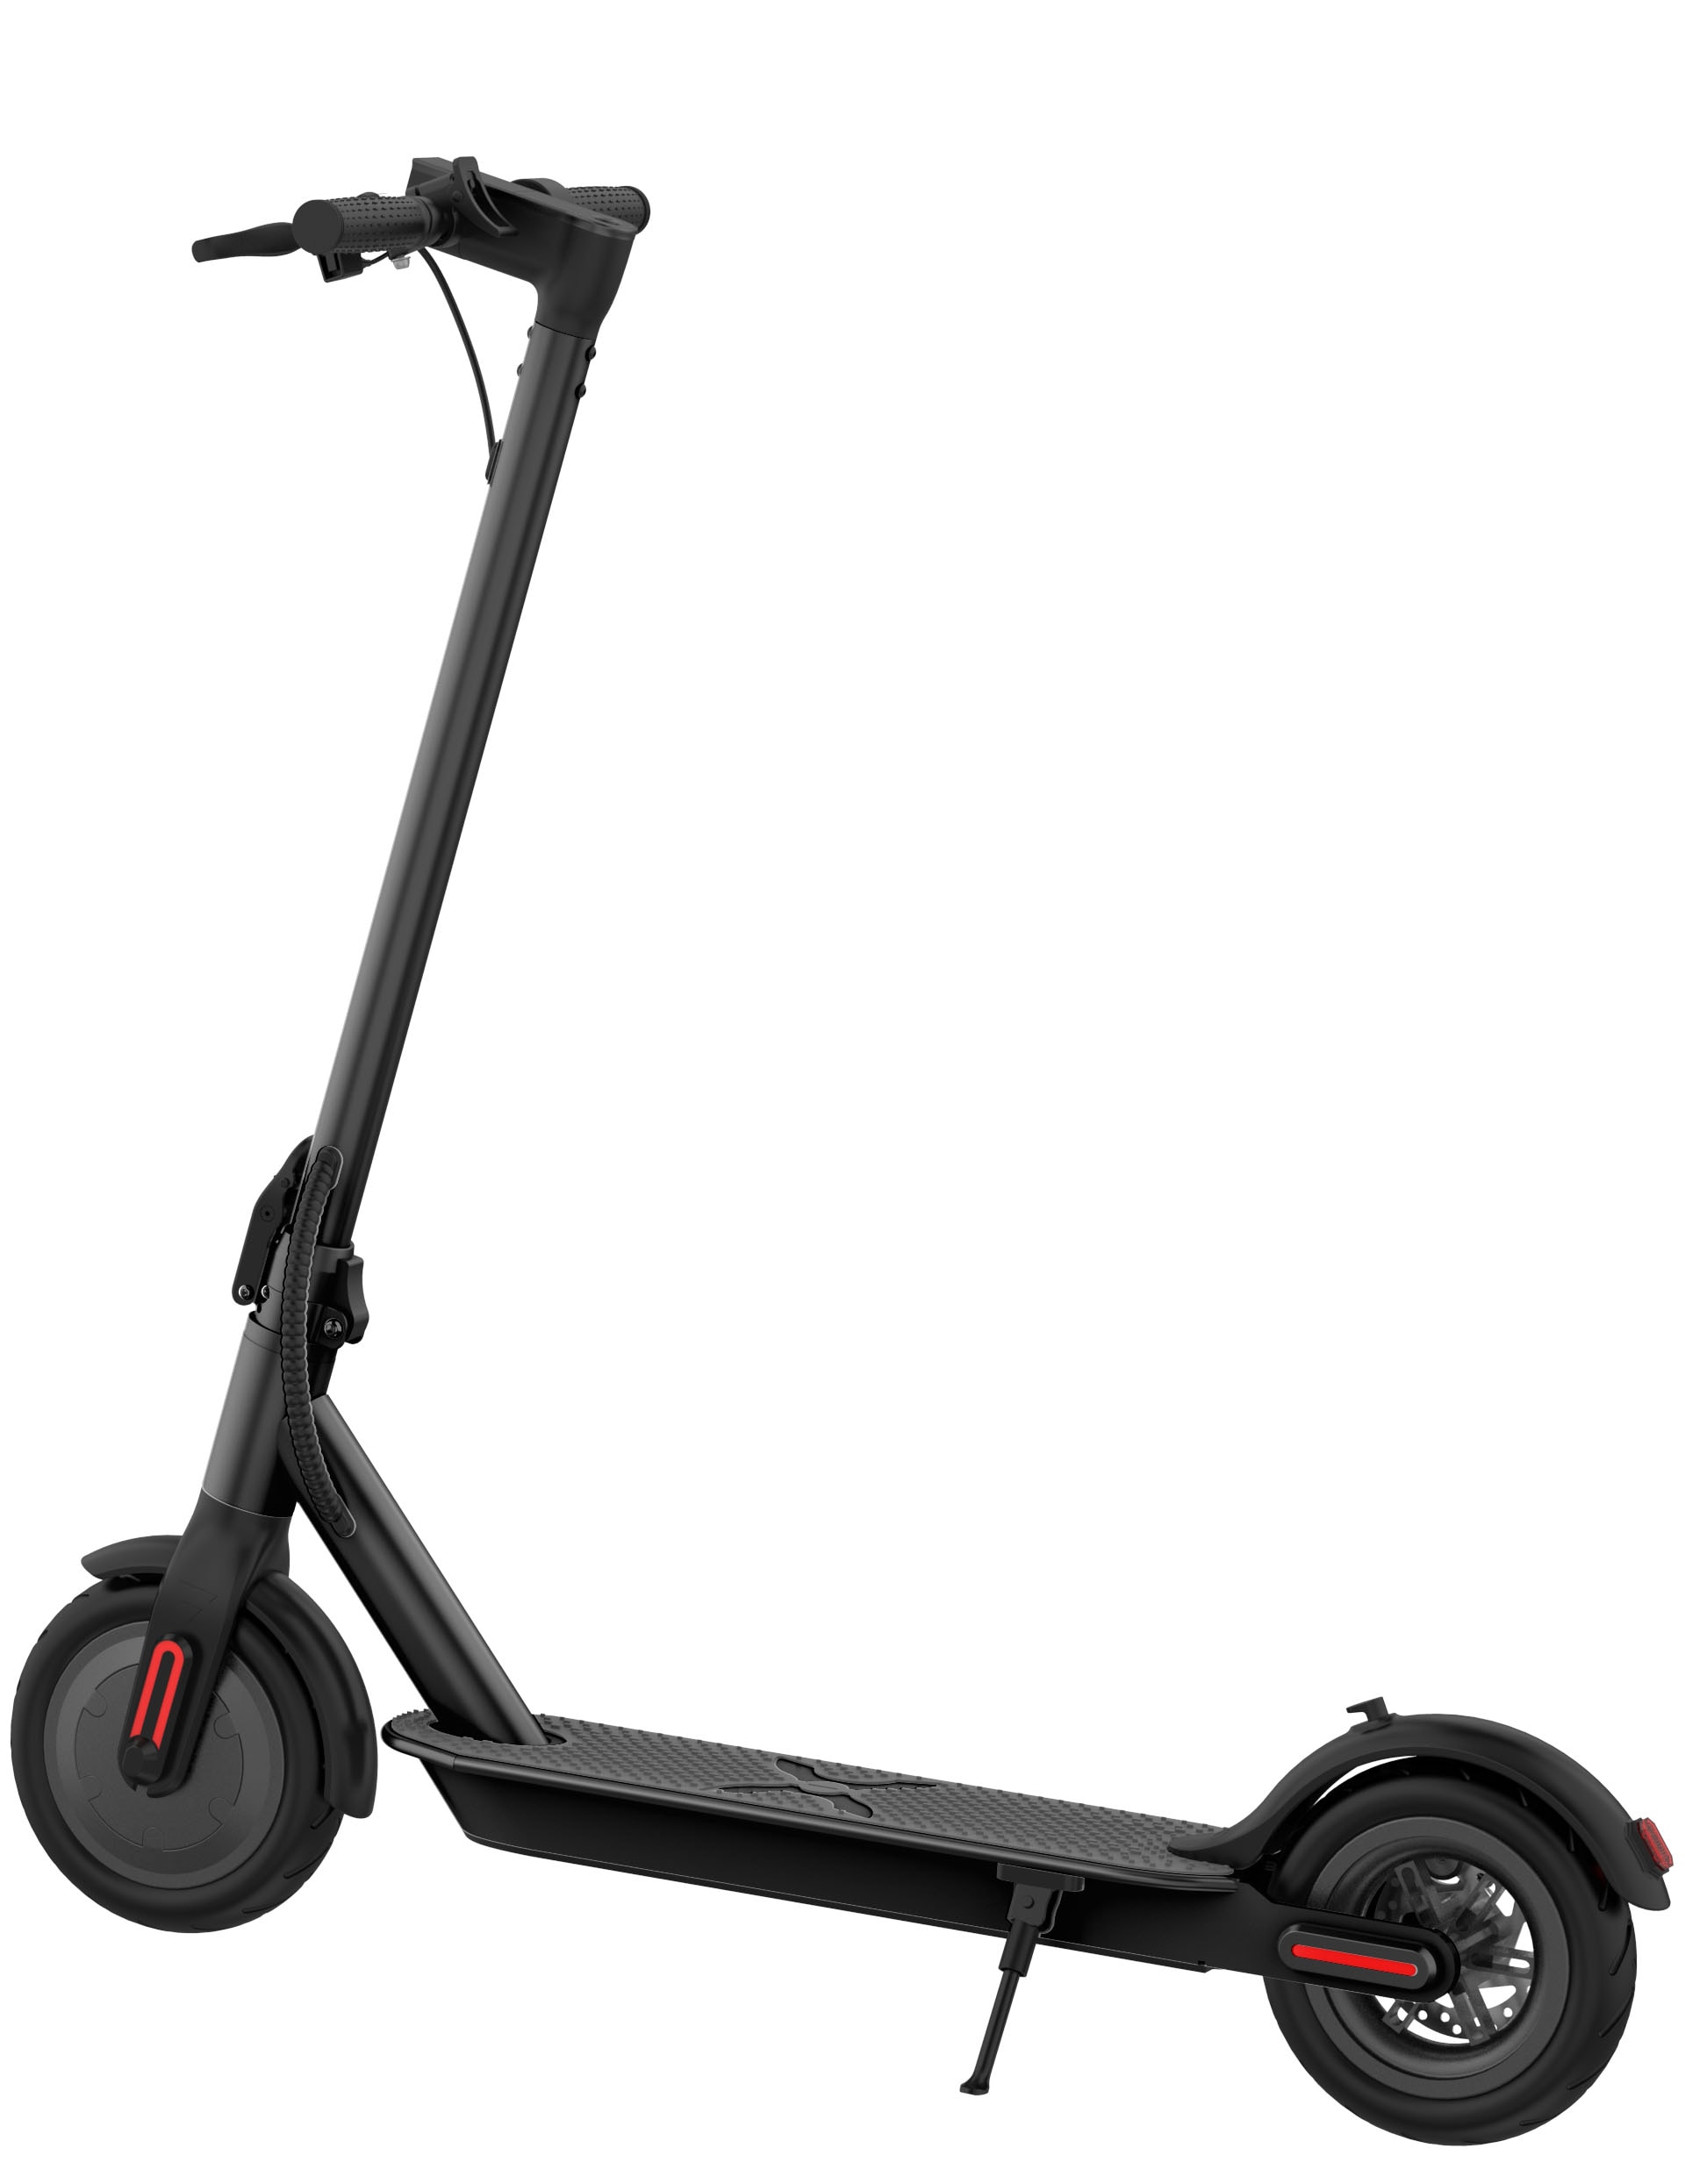  Aosom Stunt Scooter, Pro Scooter, Entry Level Freestyle Scooter  w/Lightweight Alloy Deck for 14 Years and Up Teens, Adults, Blue : Sports &  Outdoors